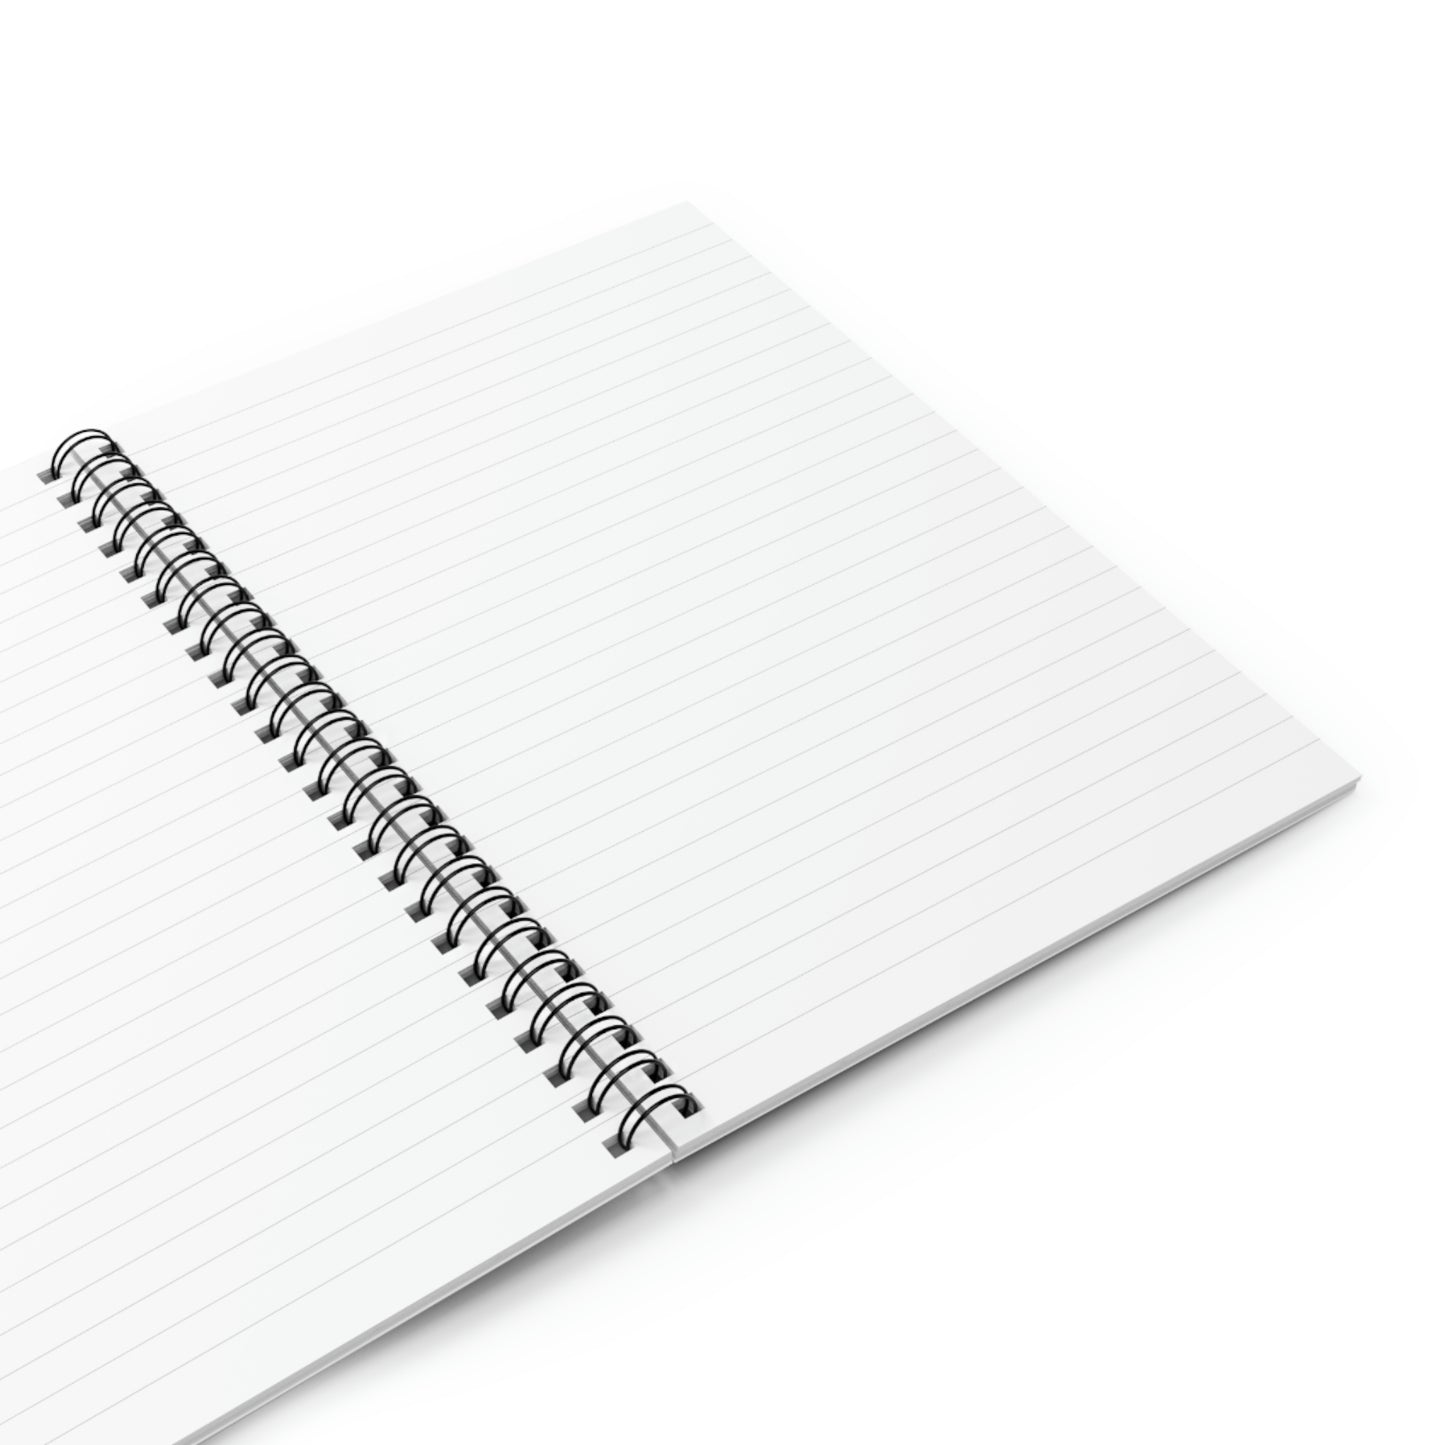 Noble Spiral Notebook - Ruled Line